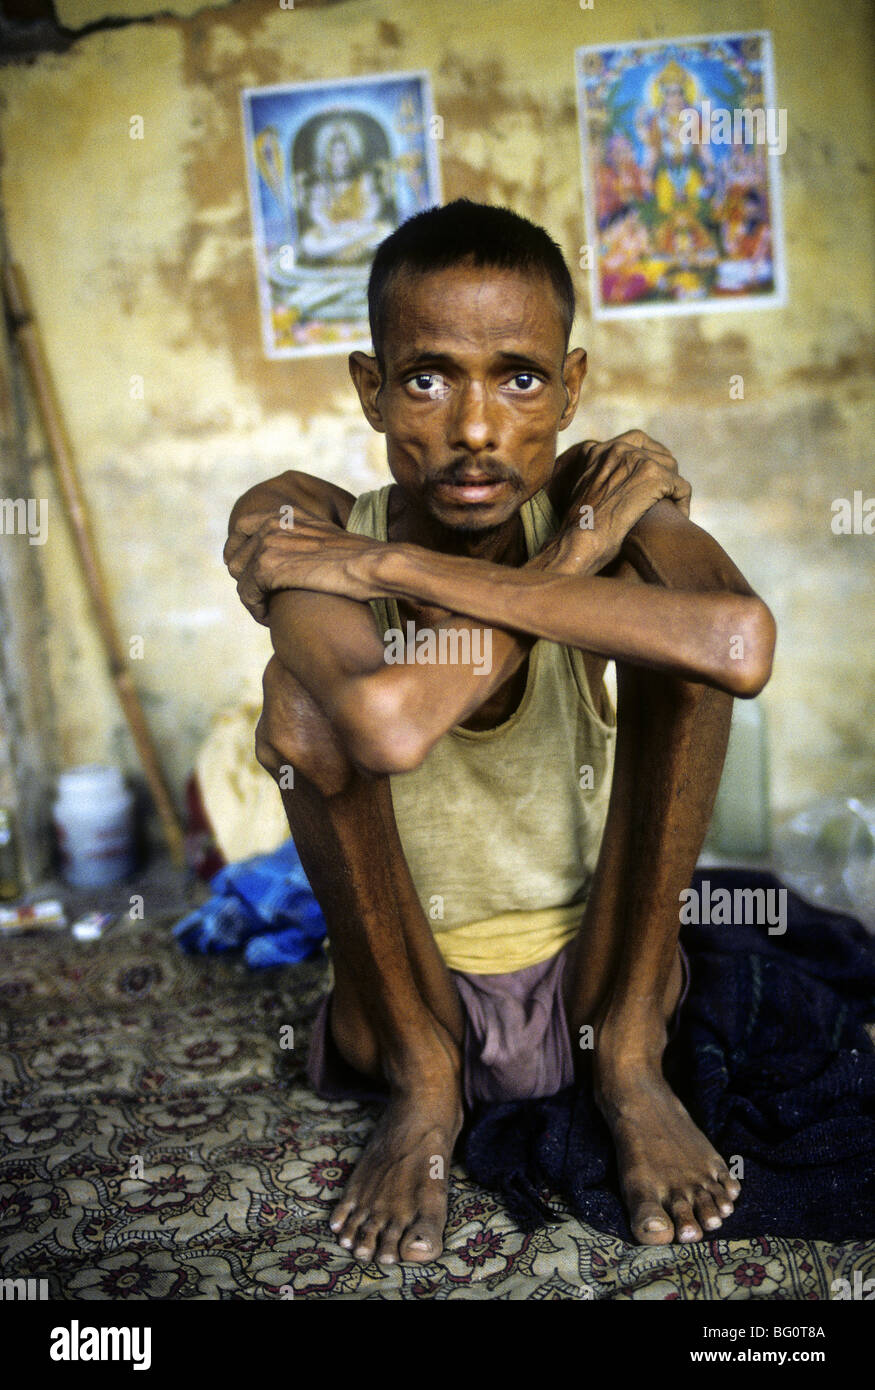 Portrait of an young man with Aids in his home in Mumbai, India Stock Photo